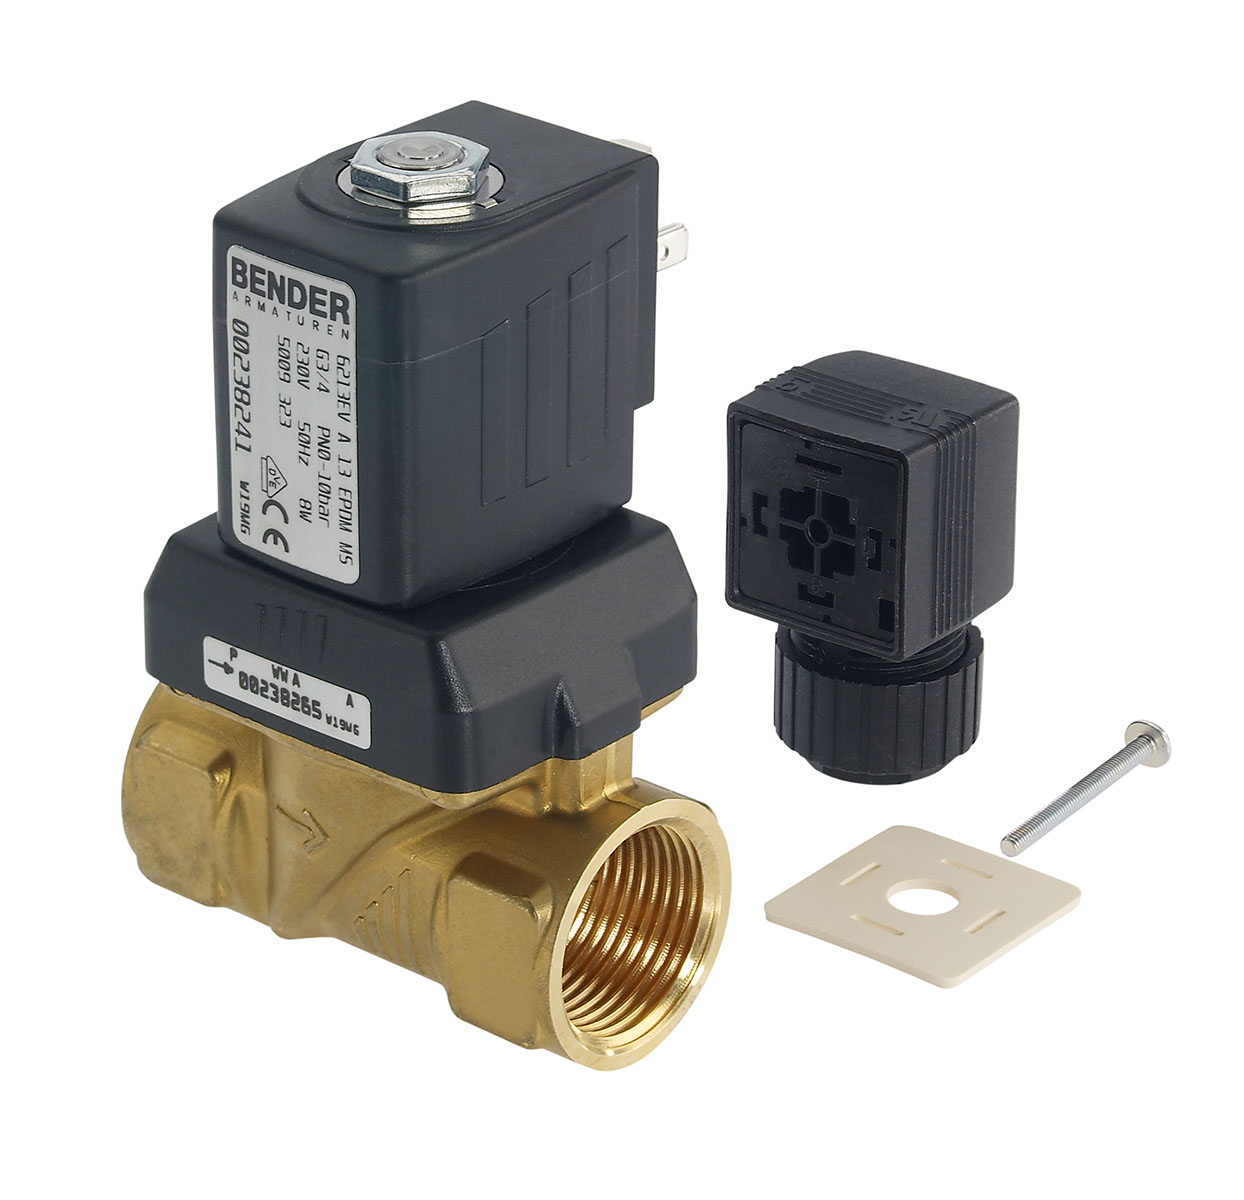 5009300 - 2/2 way solenoidvalve normally closed for fluids Type 1; female thread